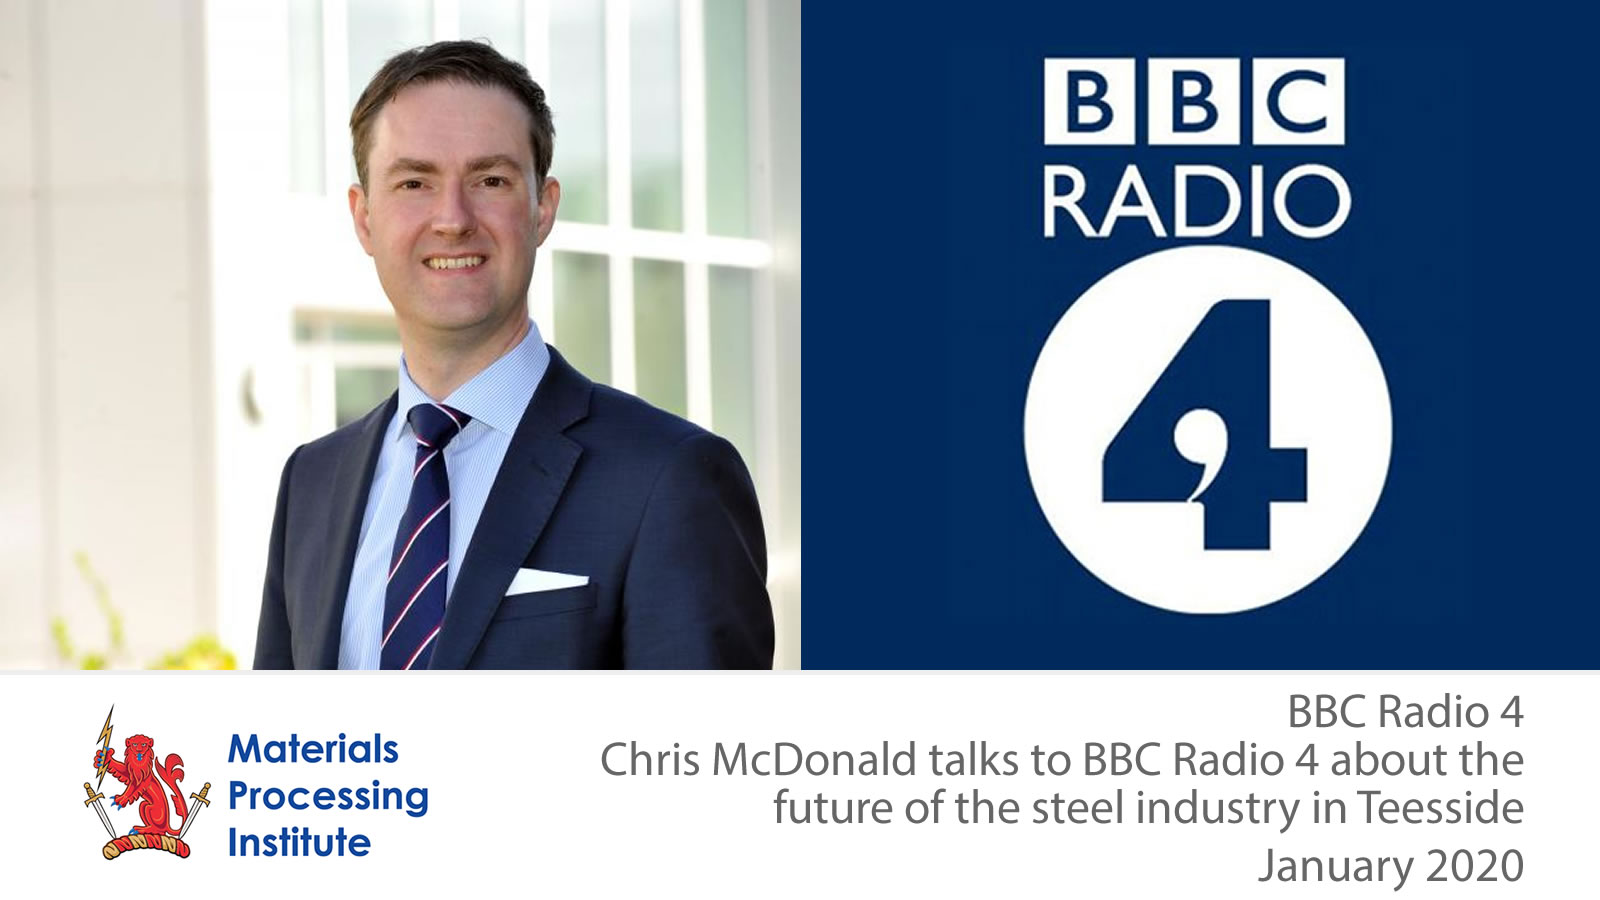 Chris McDonald of the Materials Processing Institute talks to BBC Radio 4 about the future of the steel industry in Teesside - January 2020